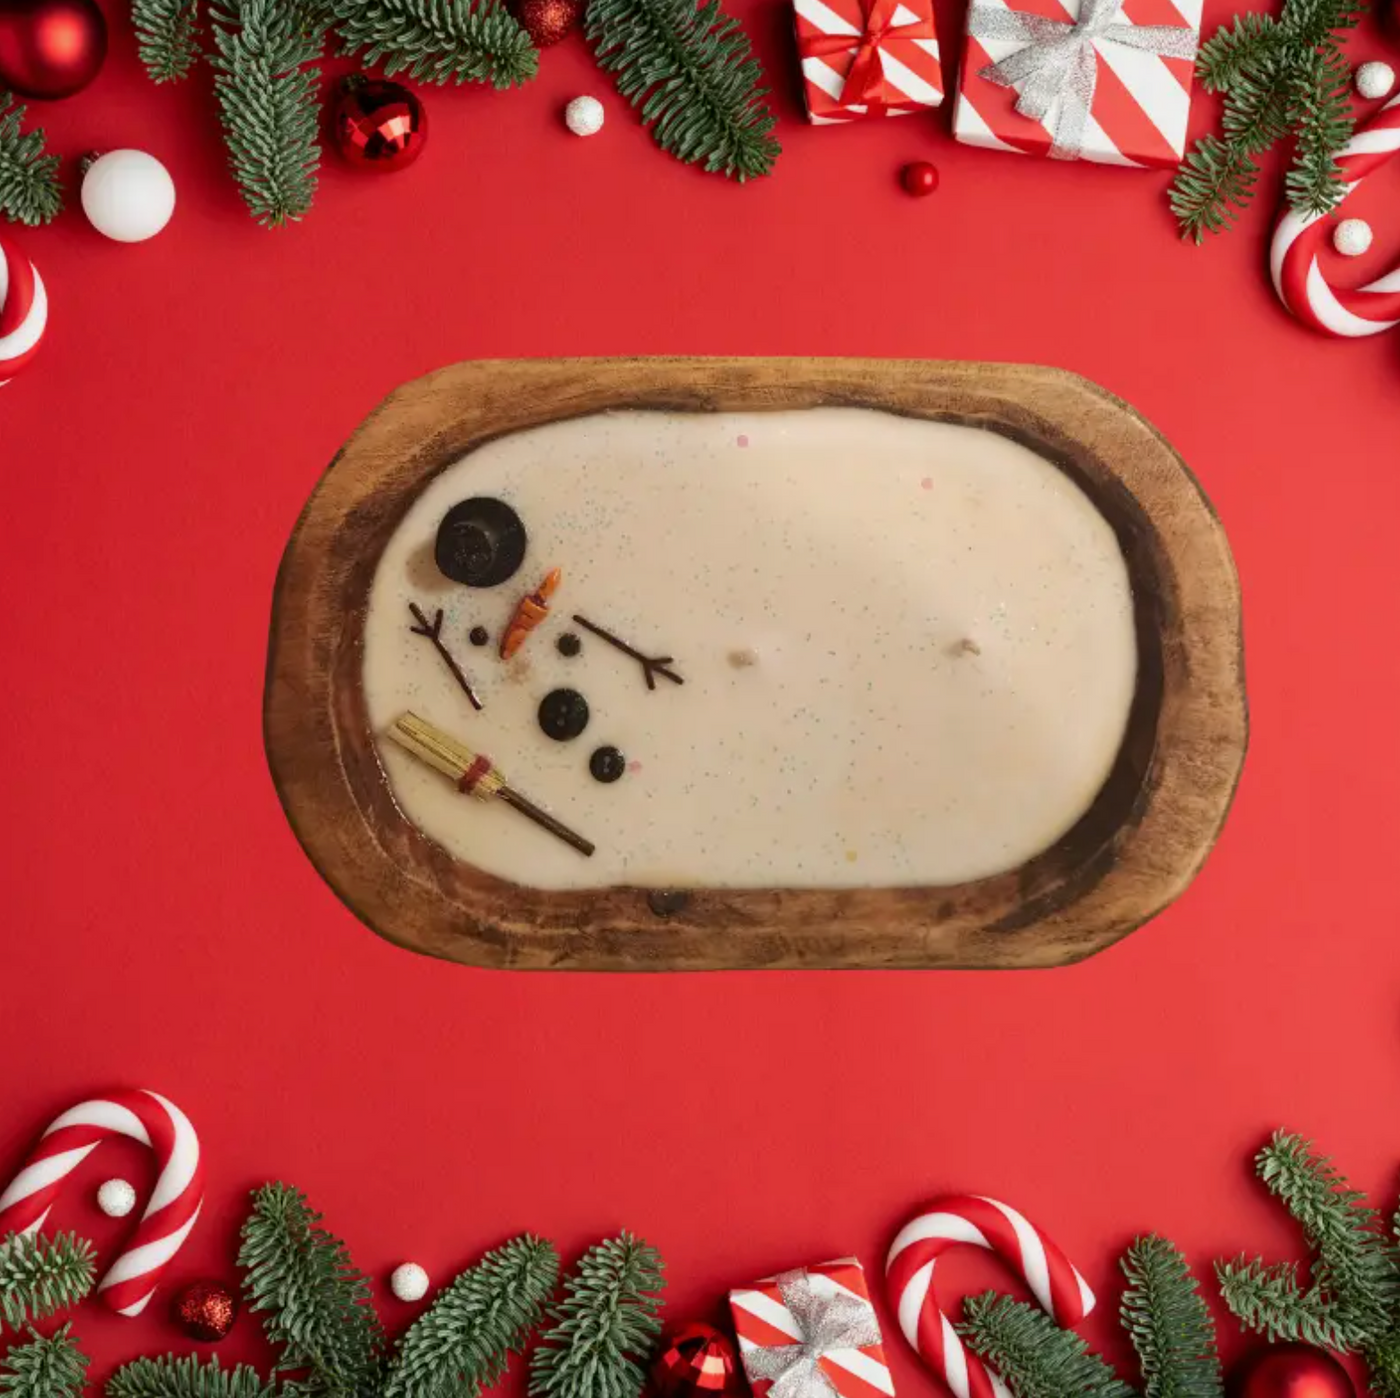 The Melted Snowman Holiday Dough Bowl Candle